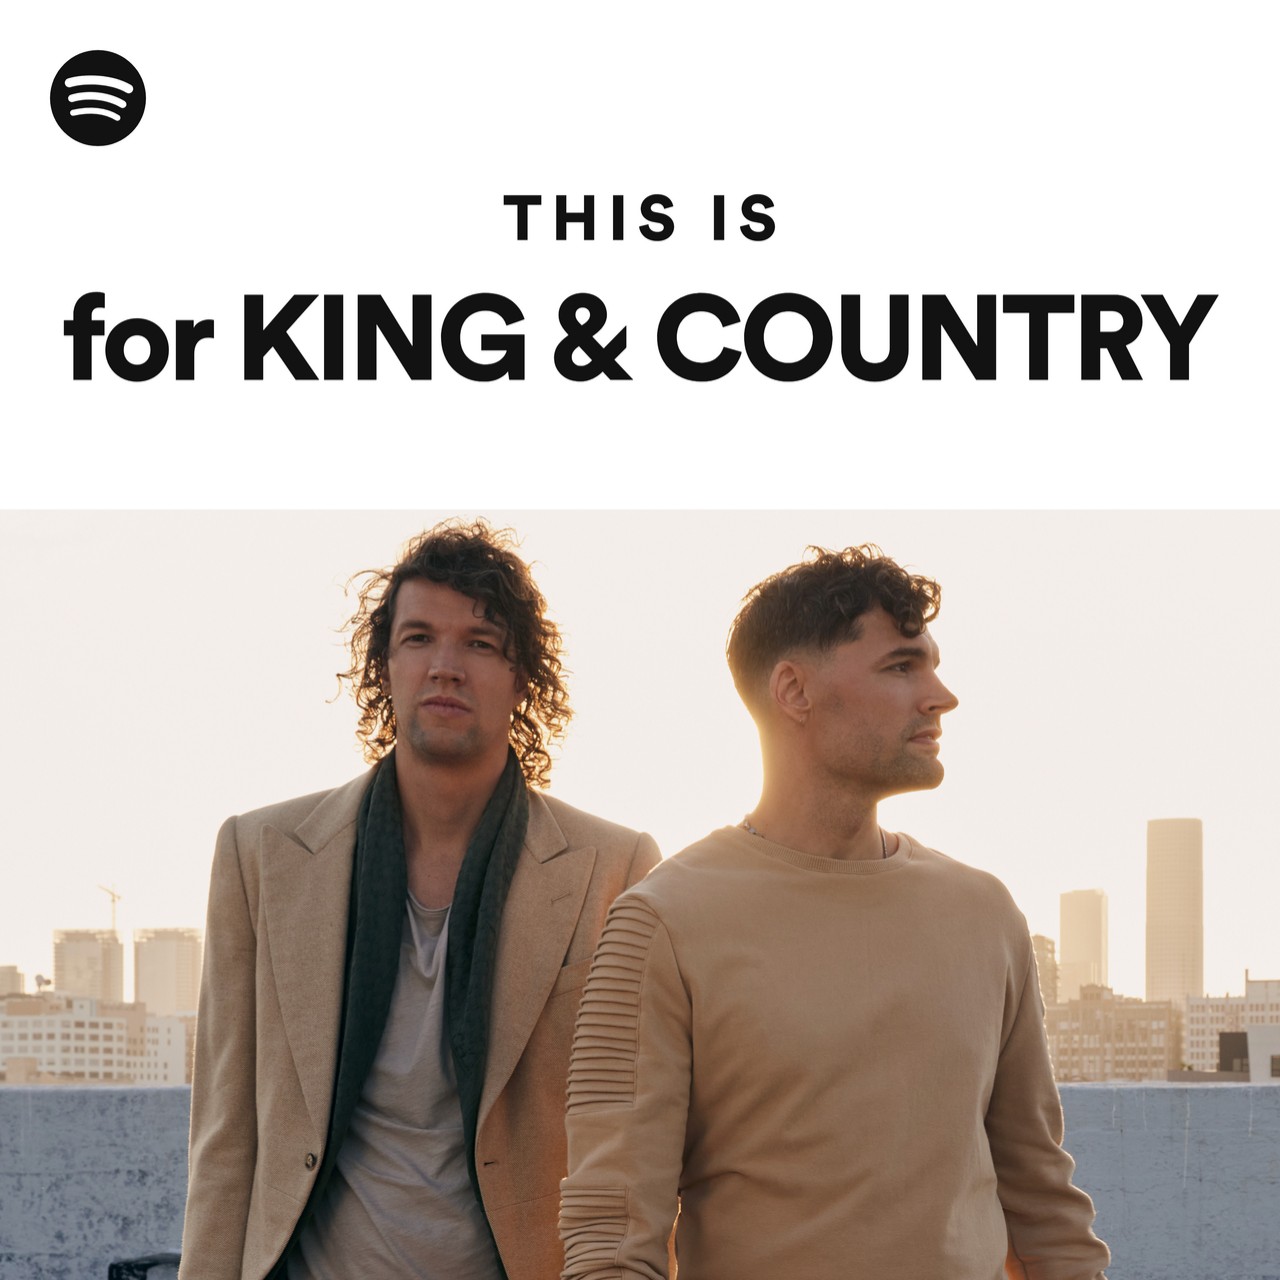 This Is for KING & COUNTRY Spotify Playlist